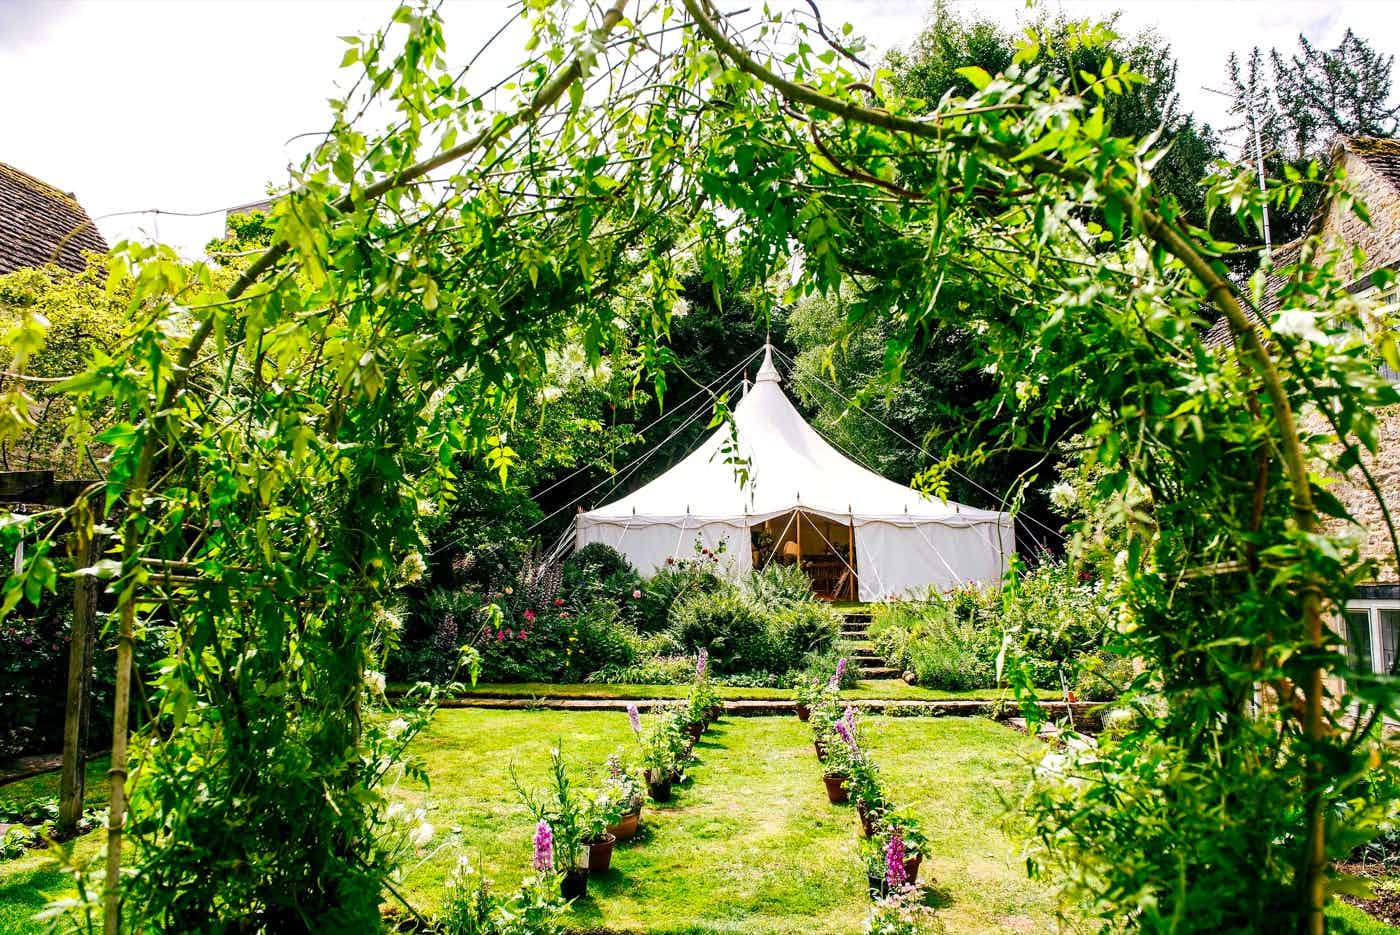 Bespoke Tents & Events